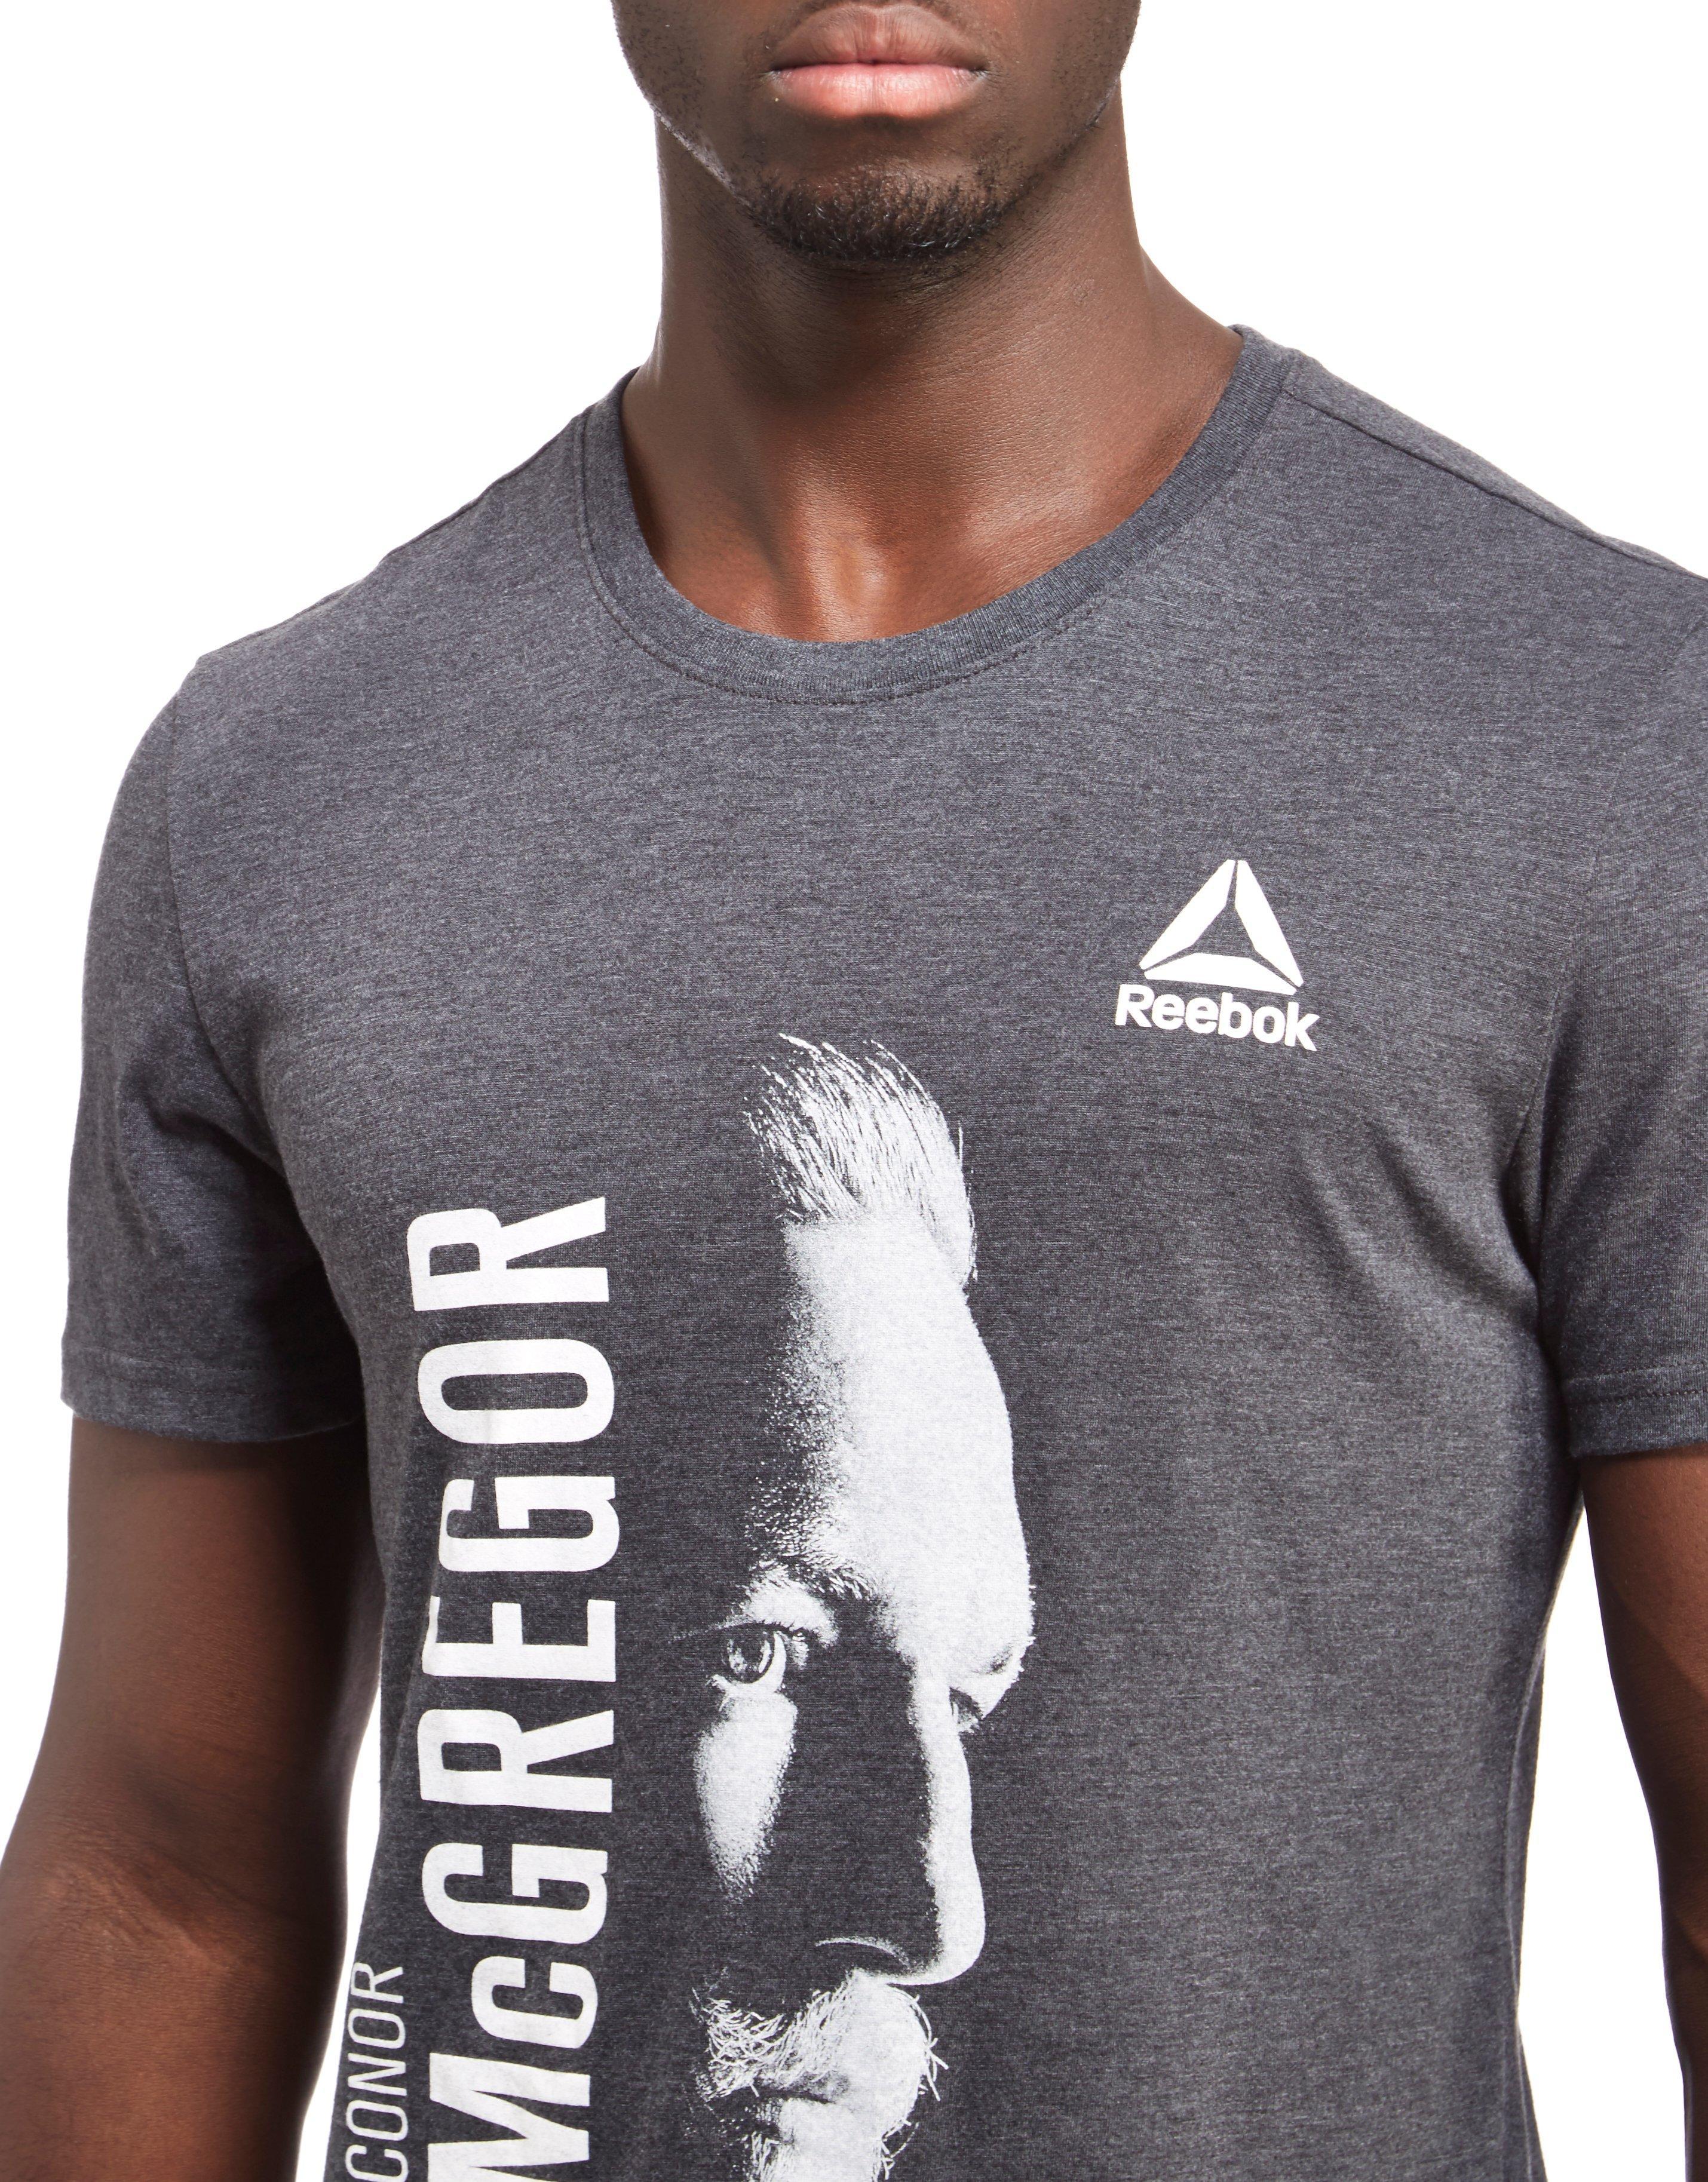 conor mcgregor reebok t shirt uk - 51% OFF - daralca.com Only For  Today,Free Shipping. In Stock.